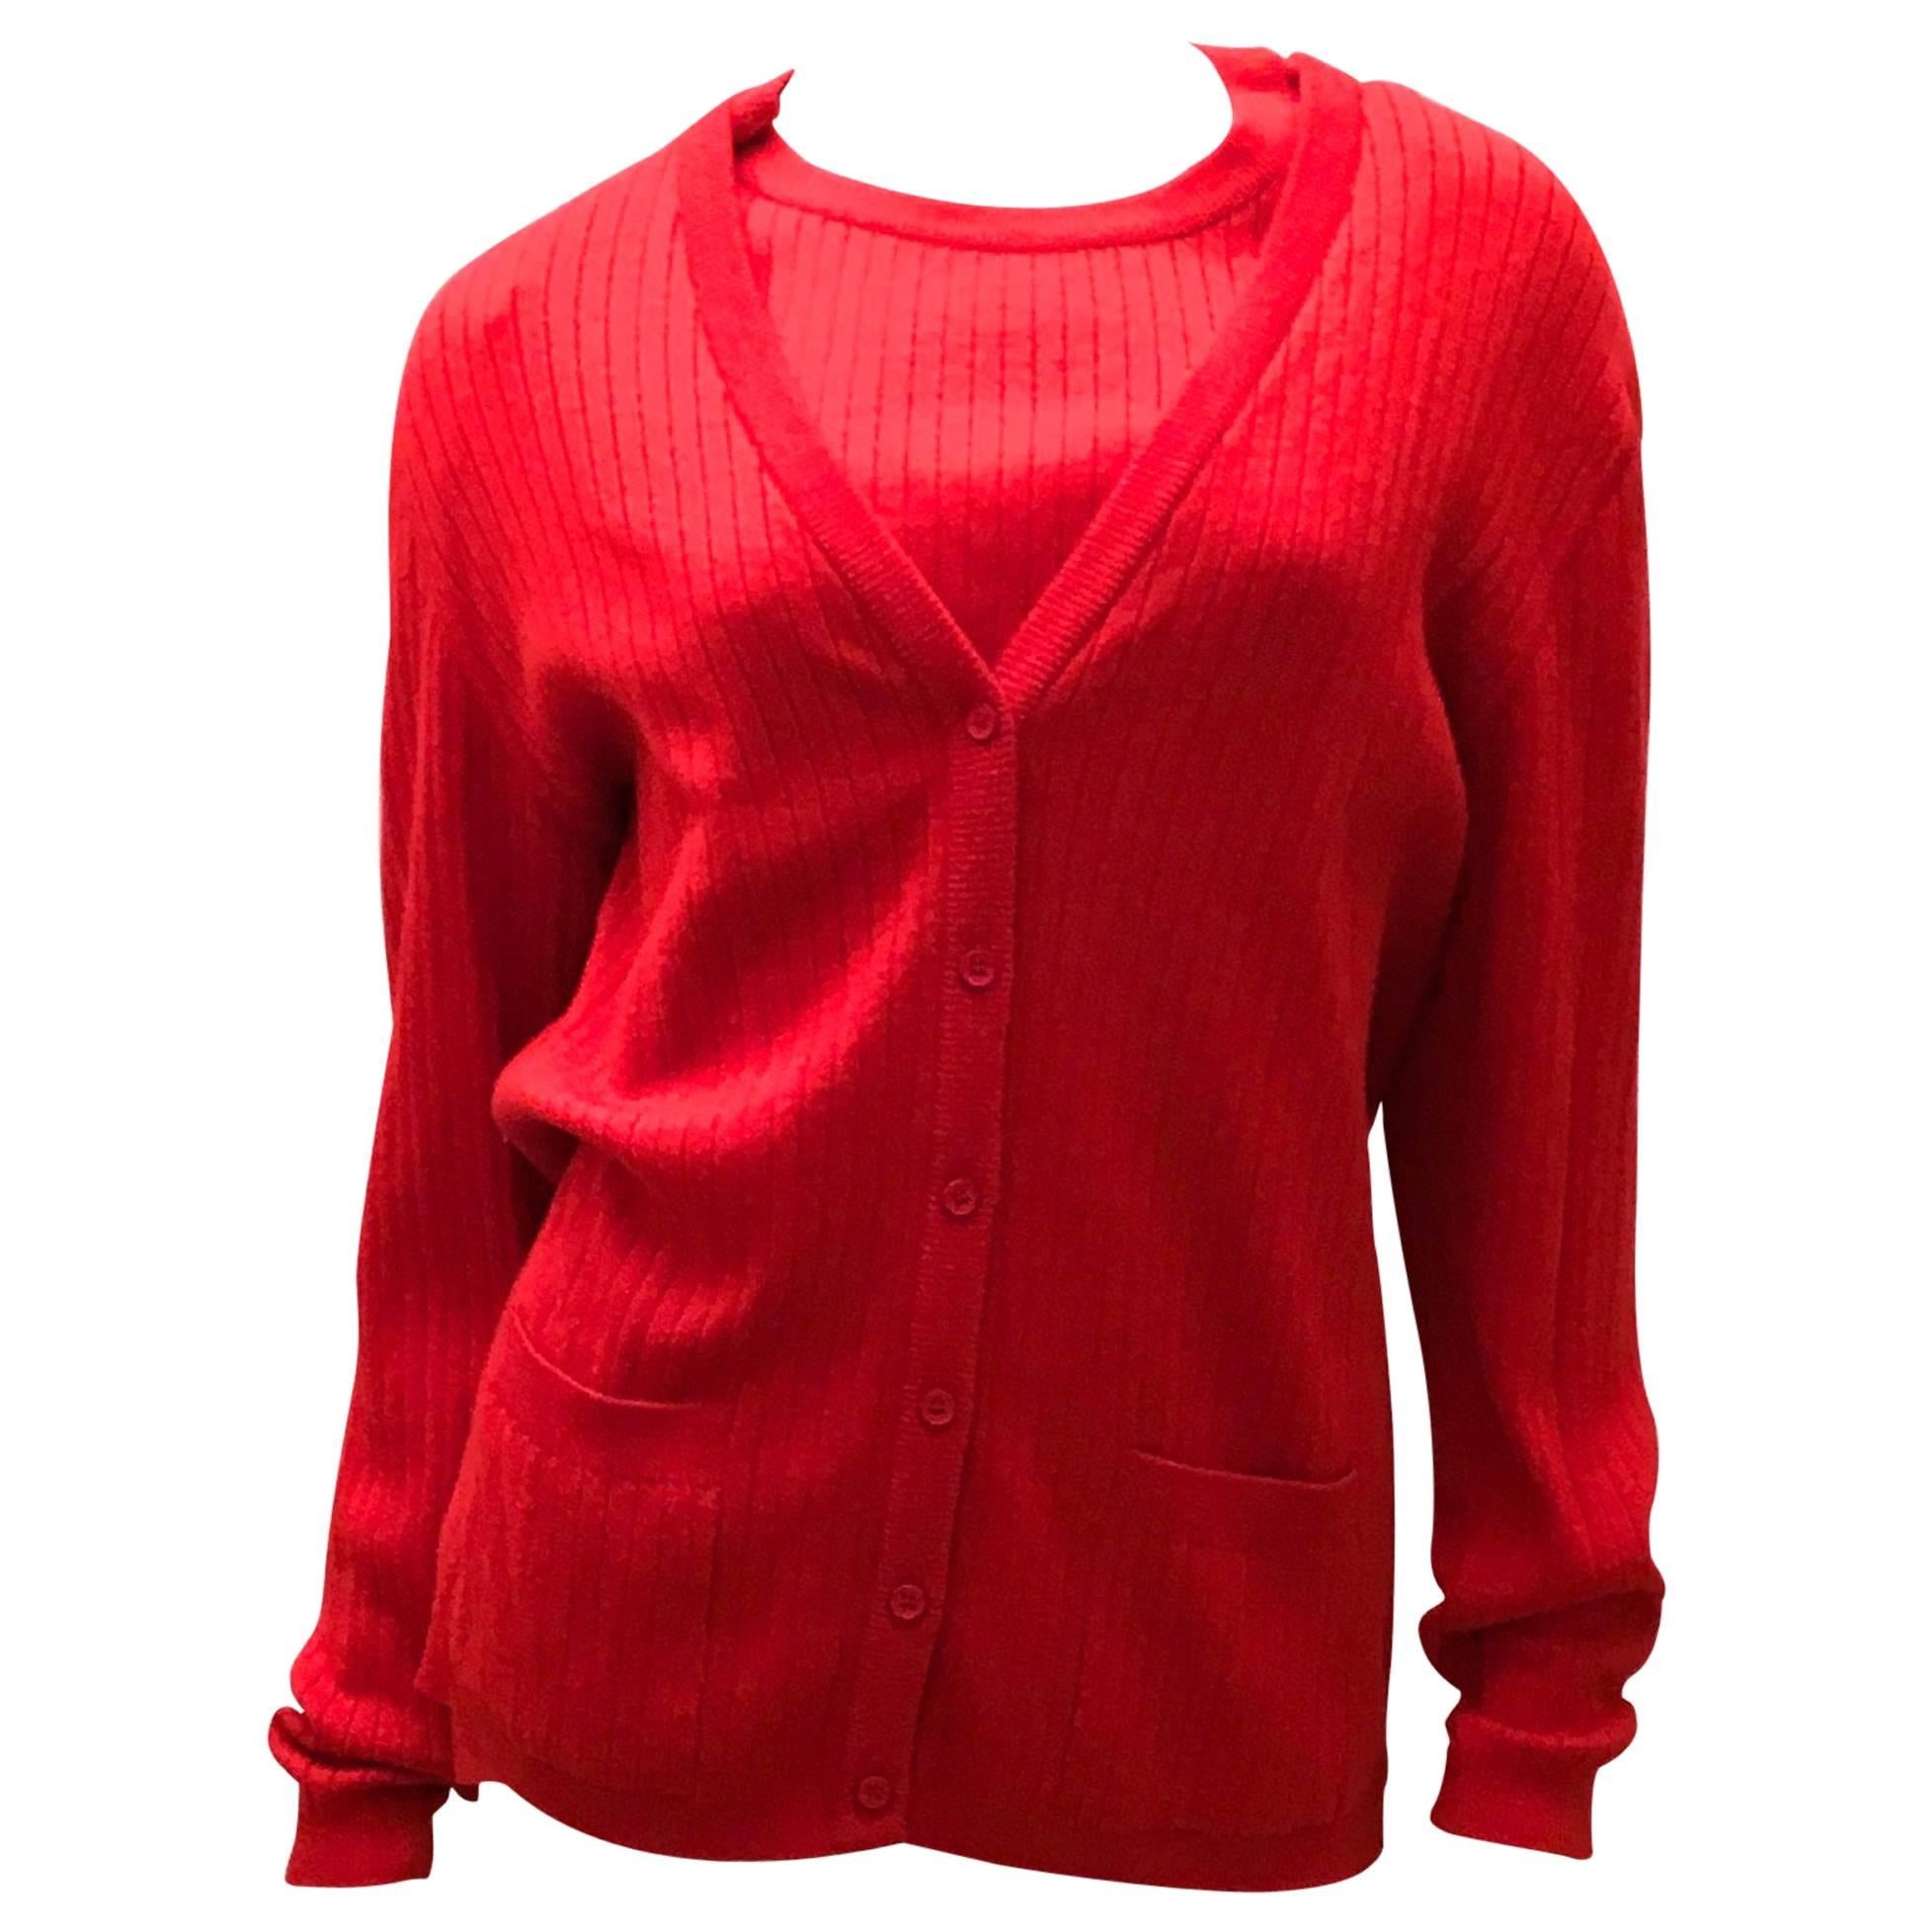 Rare Courreges Red Cardigan Sweater Set - 1970's For Sale